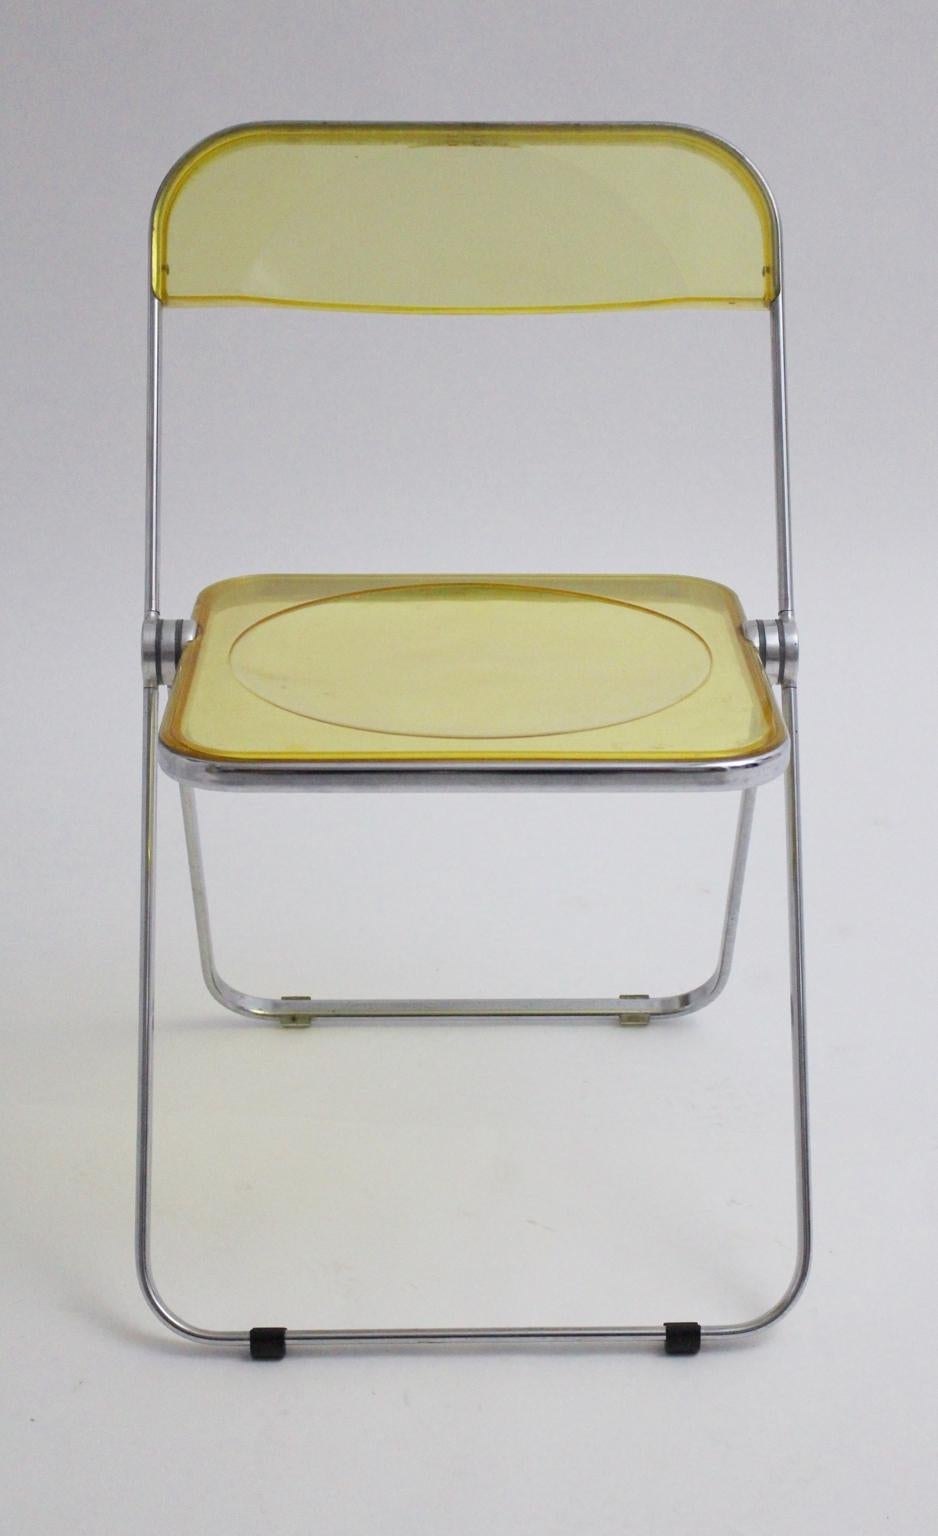 The iconic folding chair named Plia was designed by Giancarlo Piretti for Castelli, Italy, 1969.
Also the vintage Mid-Century Modern chair features a clear yellow plastic seat and backrest such as a chromed steel frame.
The vintage condition is